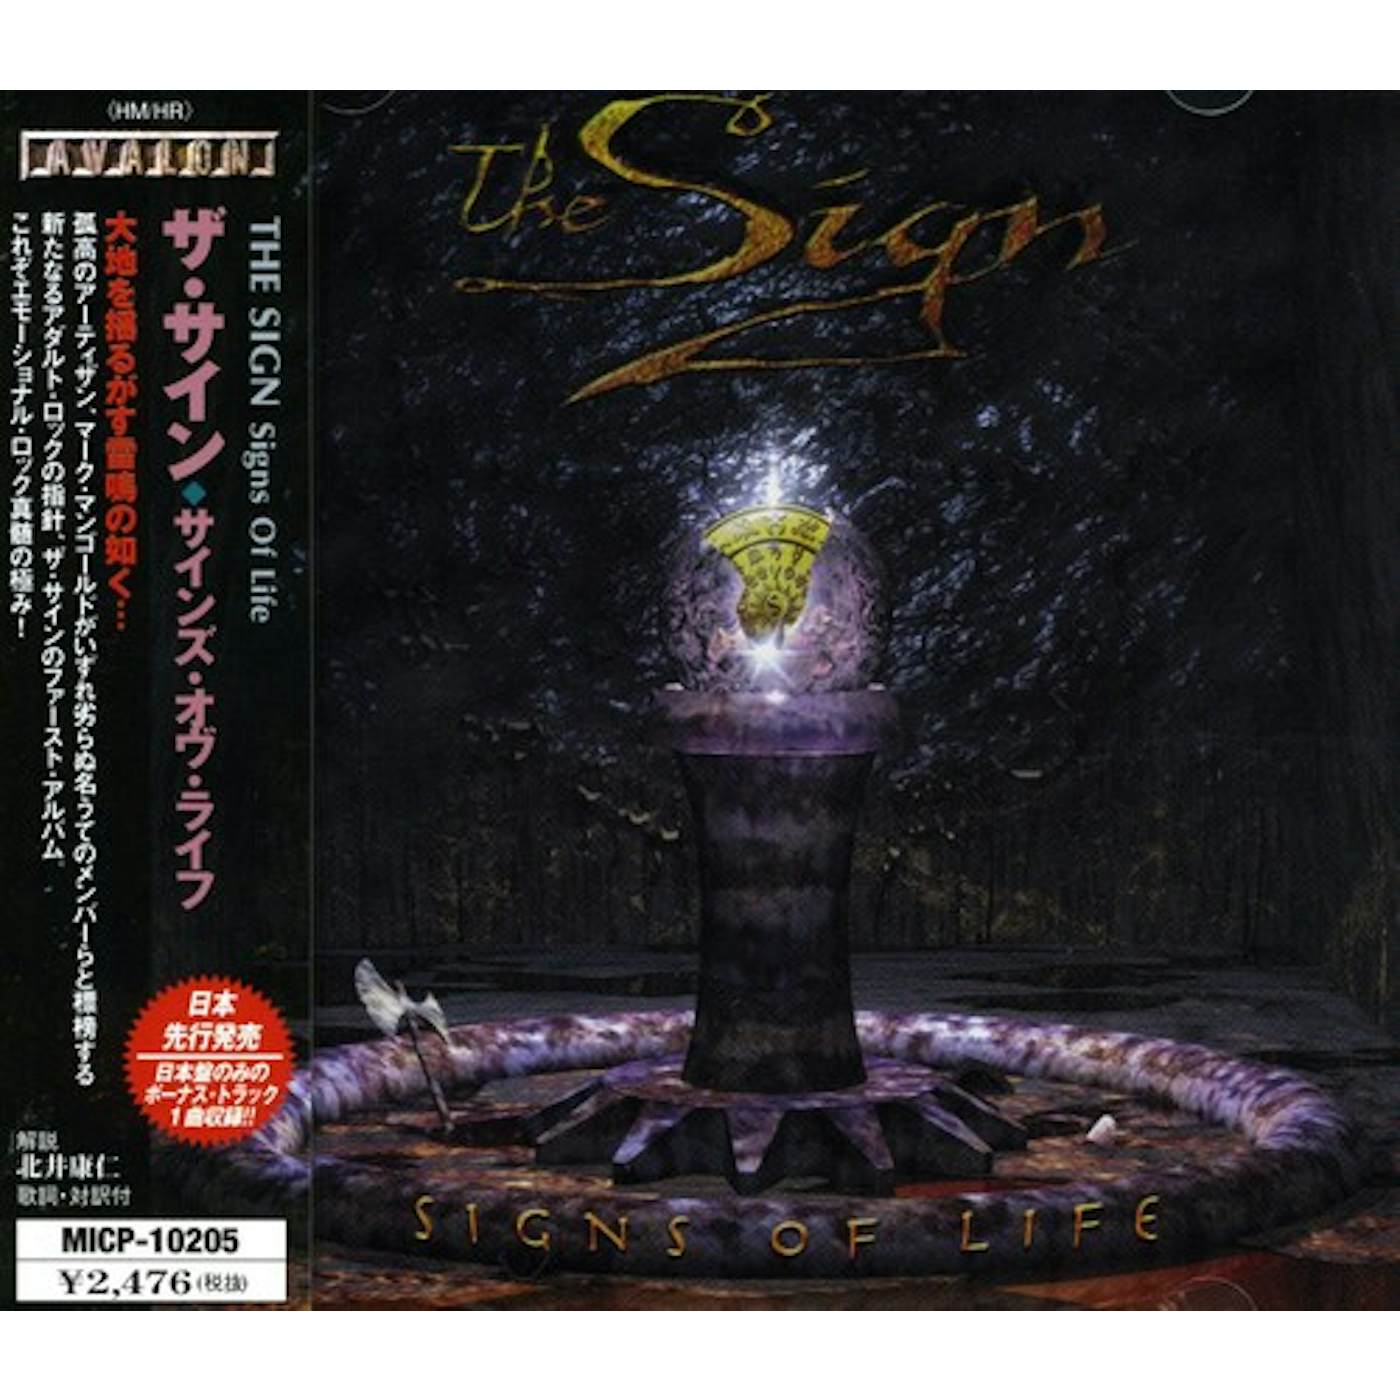 SIGNS OF LIFE CD